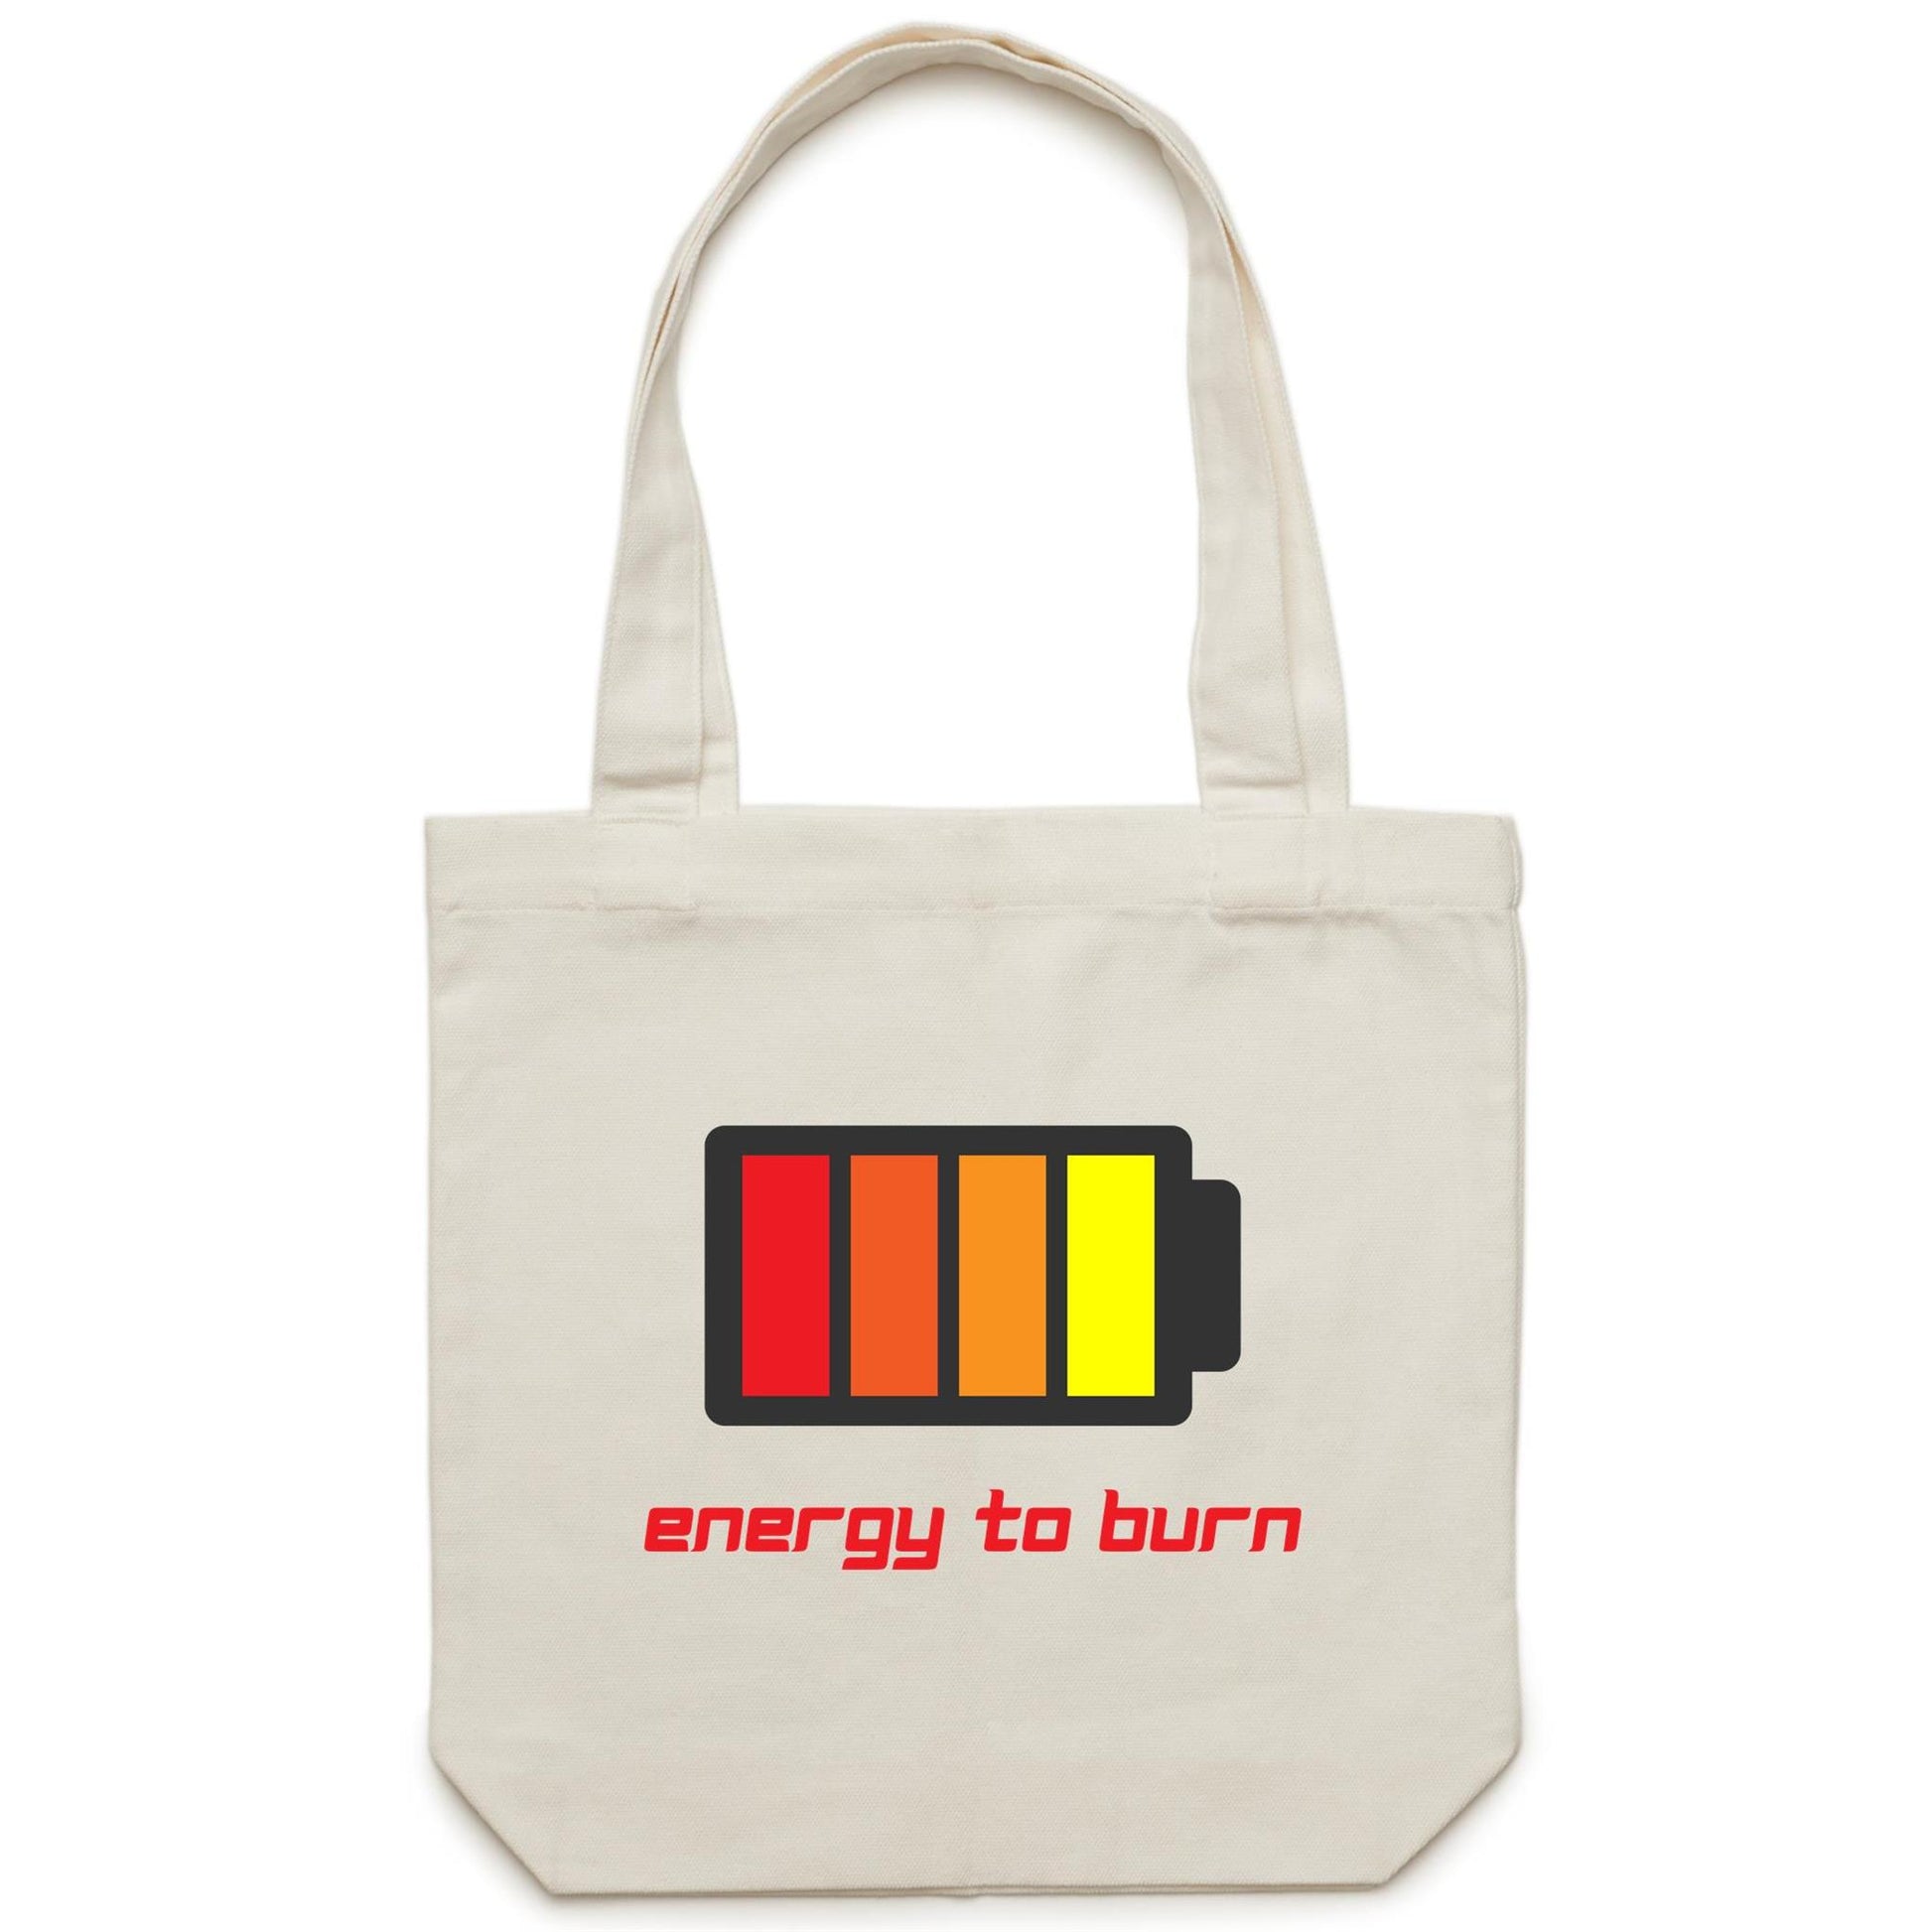 Energy To Burn - Canvas Tote Bag Cream One-Size Tote Bag